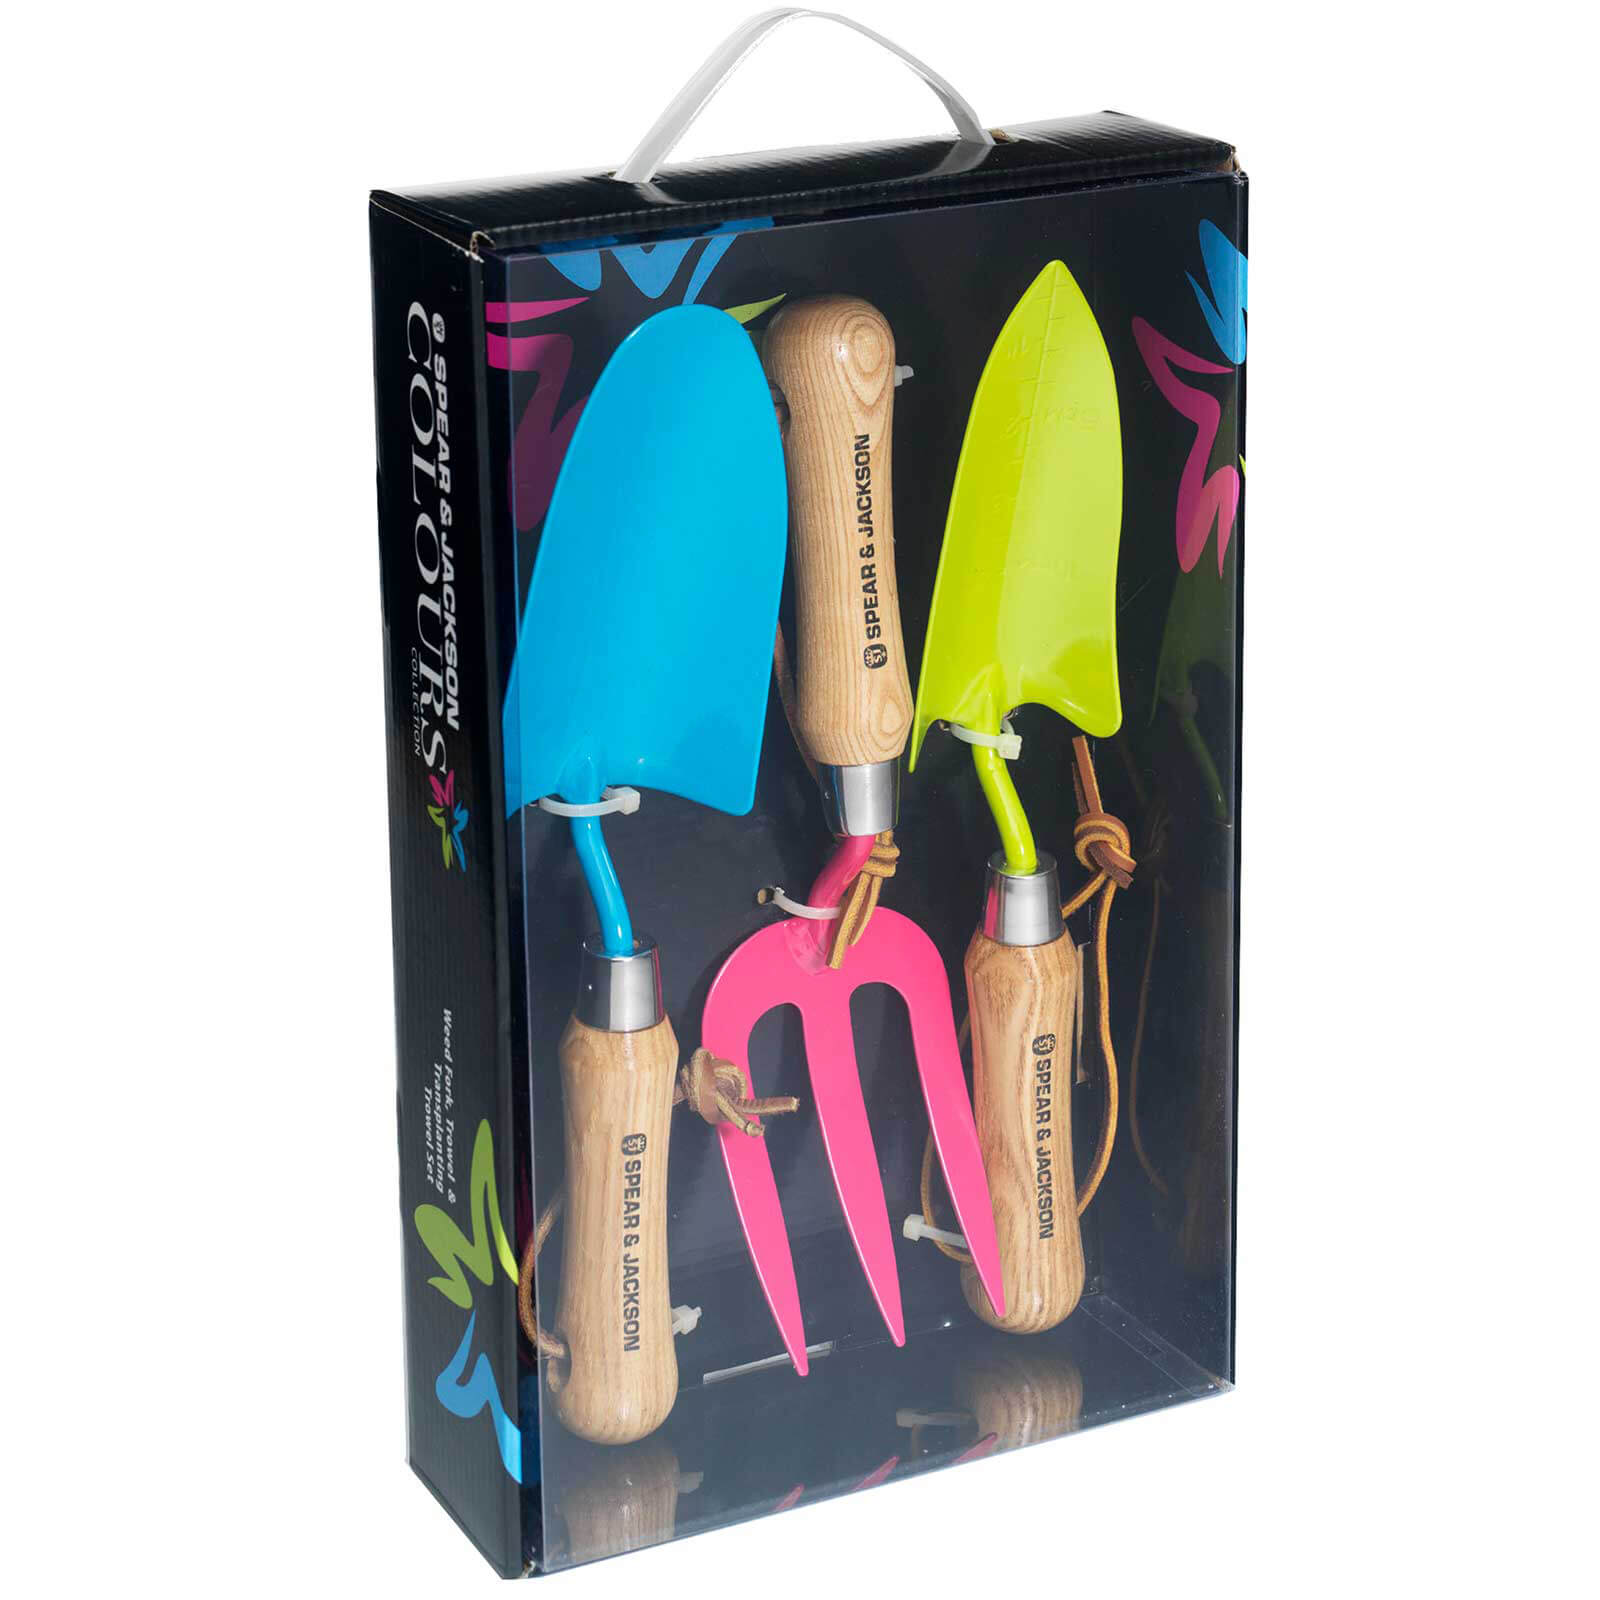 Image of Spear and Jackson Colours 3 Piece Carbon Steel Garden Tool Set